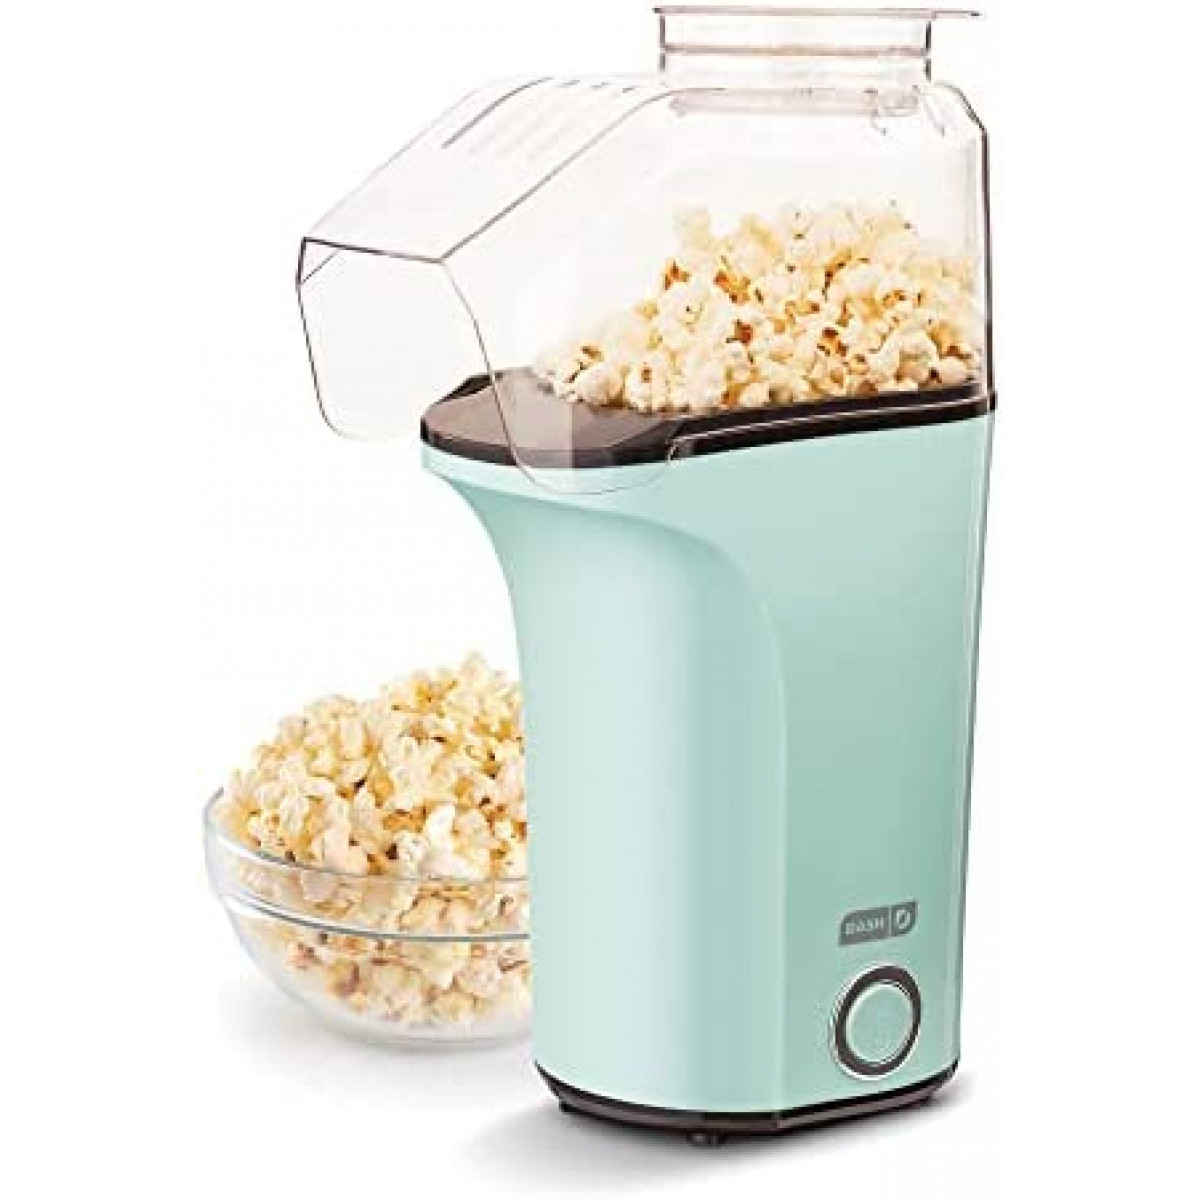 DASH Hot Air Popcorn Popper Maker with Measuring Cup to